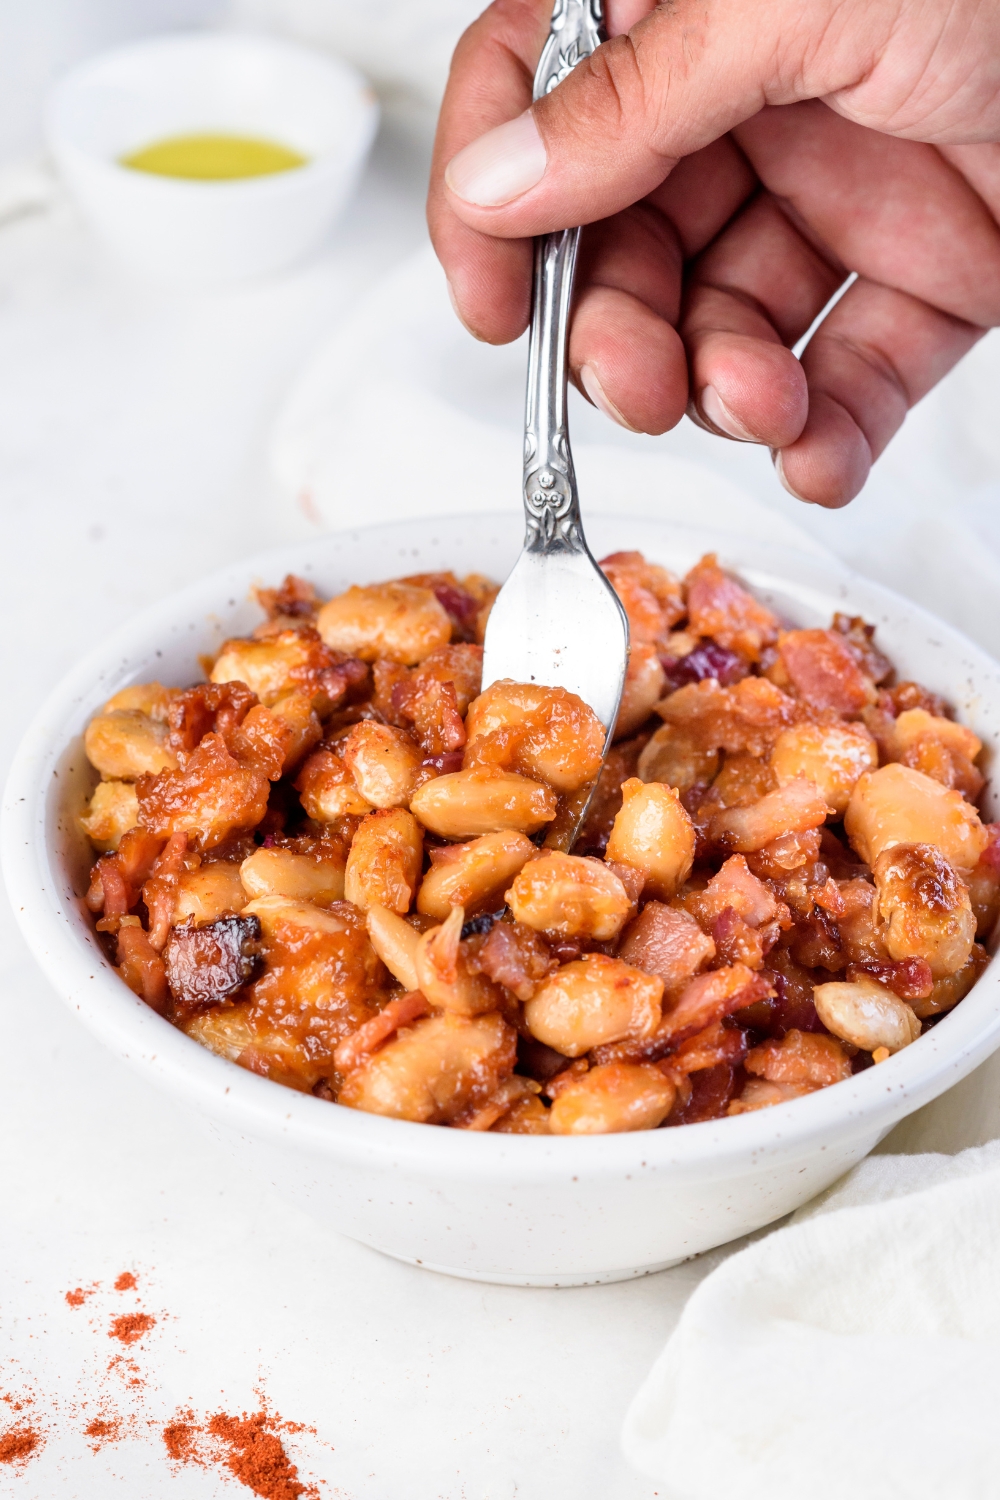 A hand using a fork to take a bite of baked beans out of a bowl filled with baked beans and bacon.